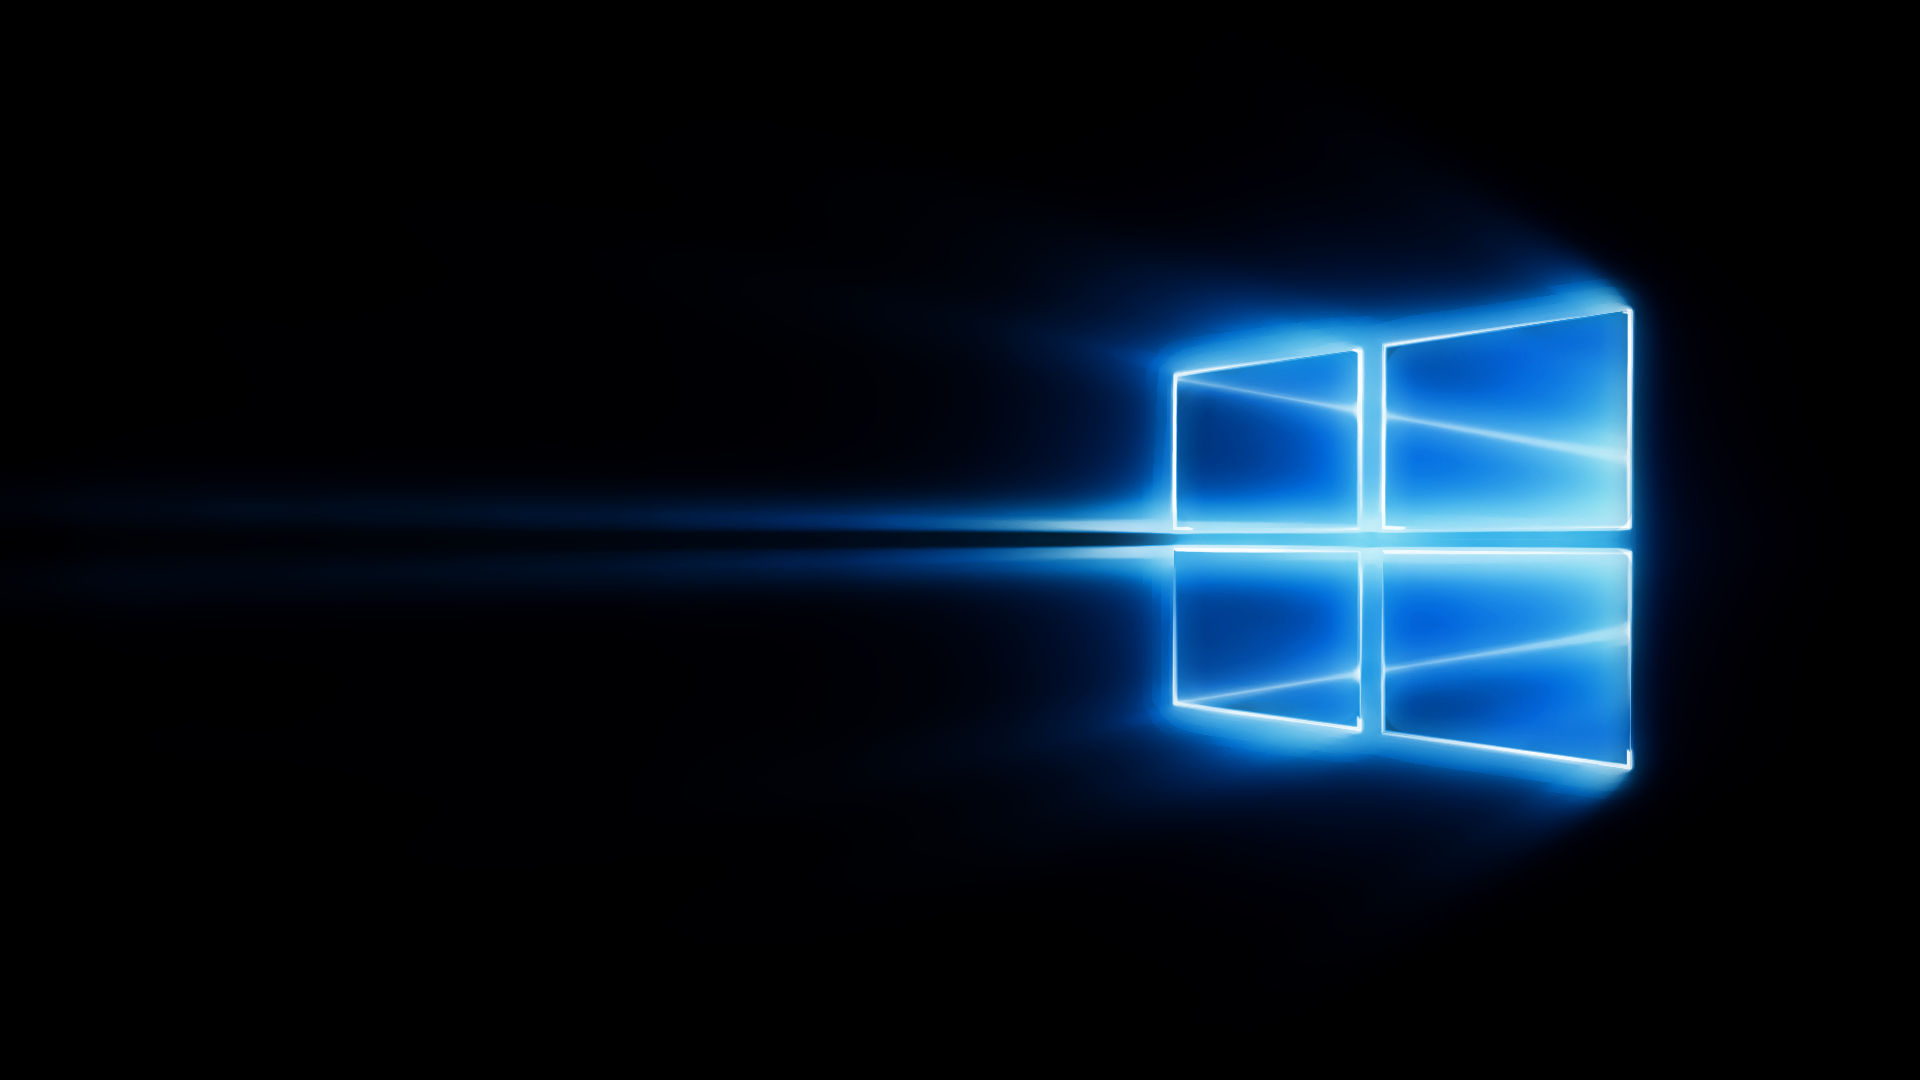 Windows 10 High Definition Backgrounds 2849   HD Wallpapers Site